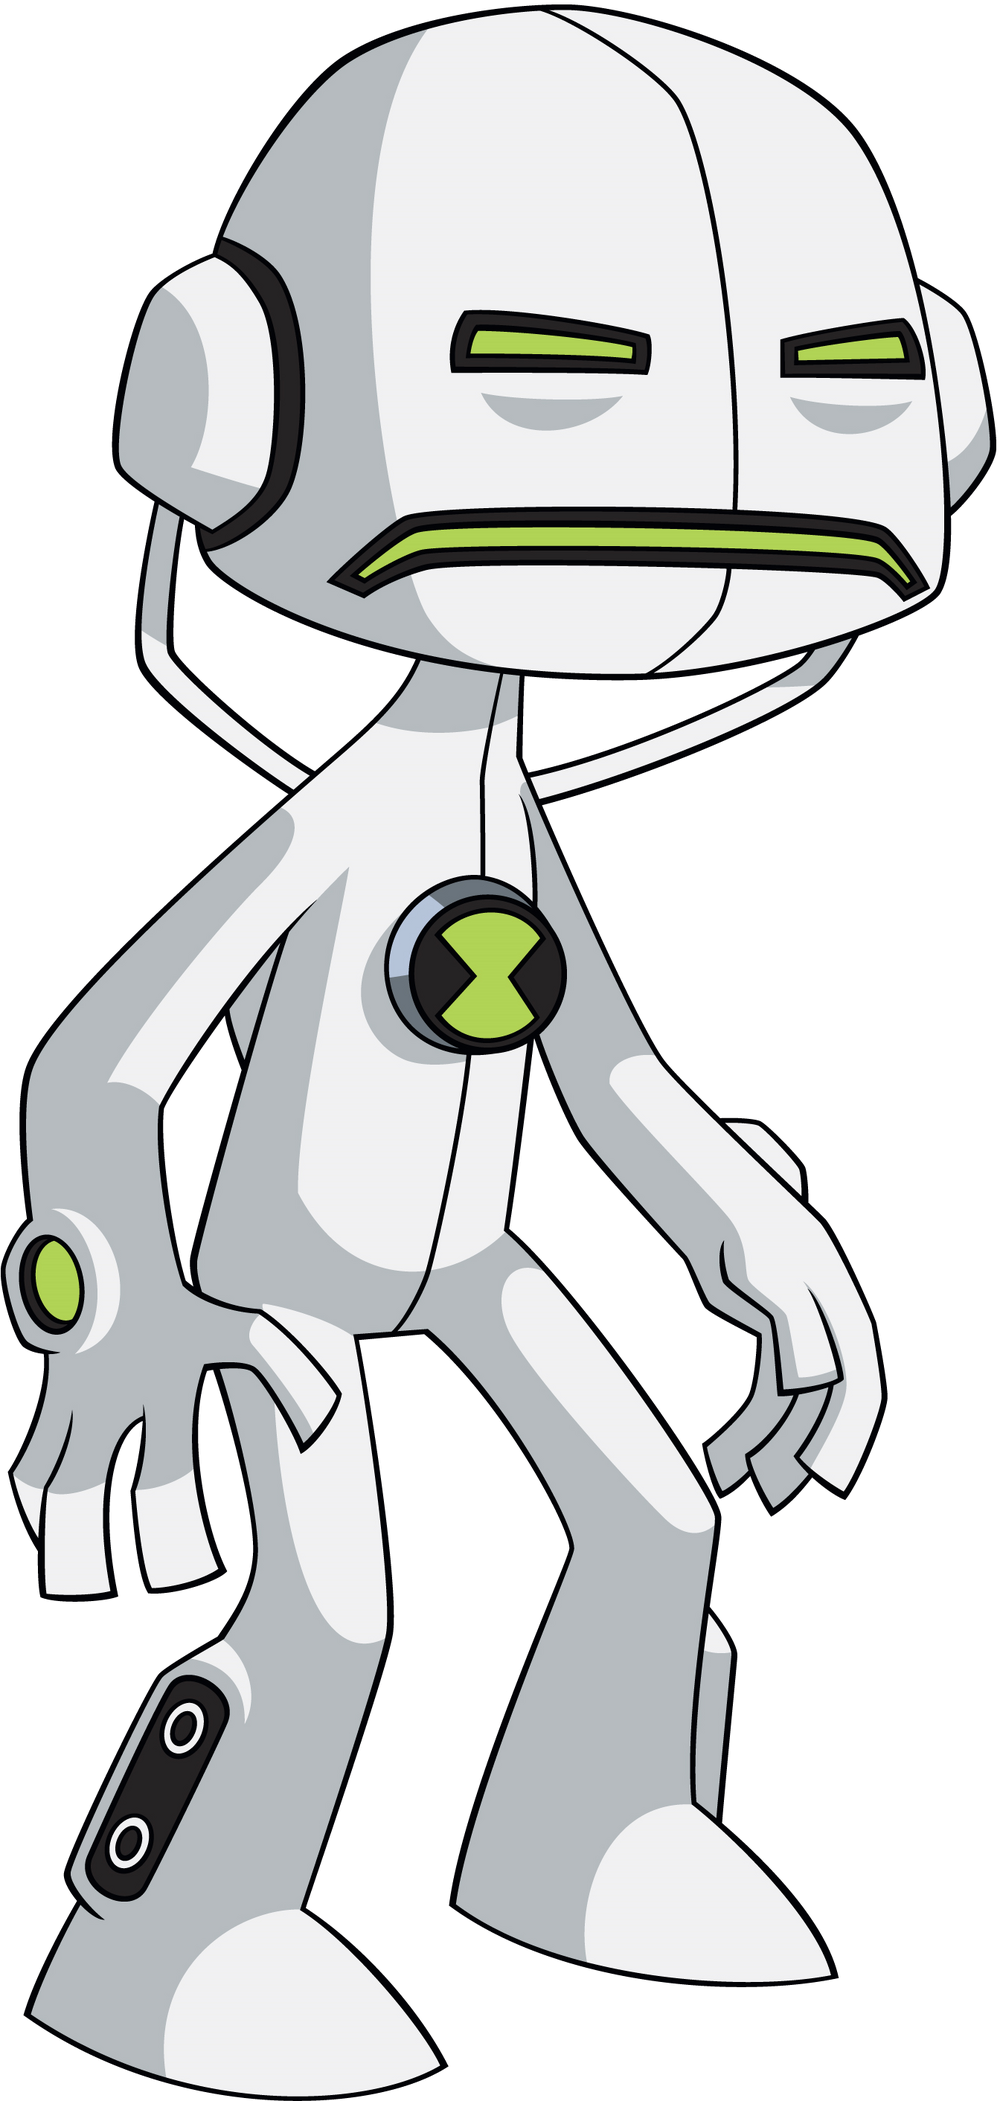 Ben 10 Fun Fact #3: Upgrade's transformation is technically not complete,  which explains the fact that he has a robotic version of Ben's voice, and  needs to merge with technology rather than